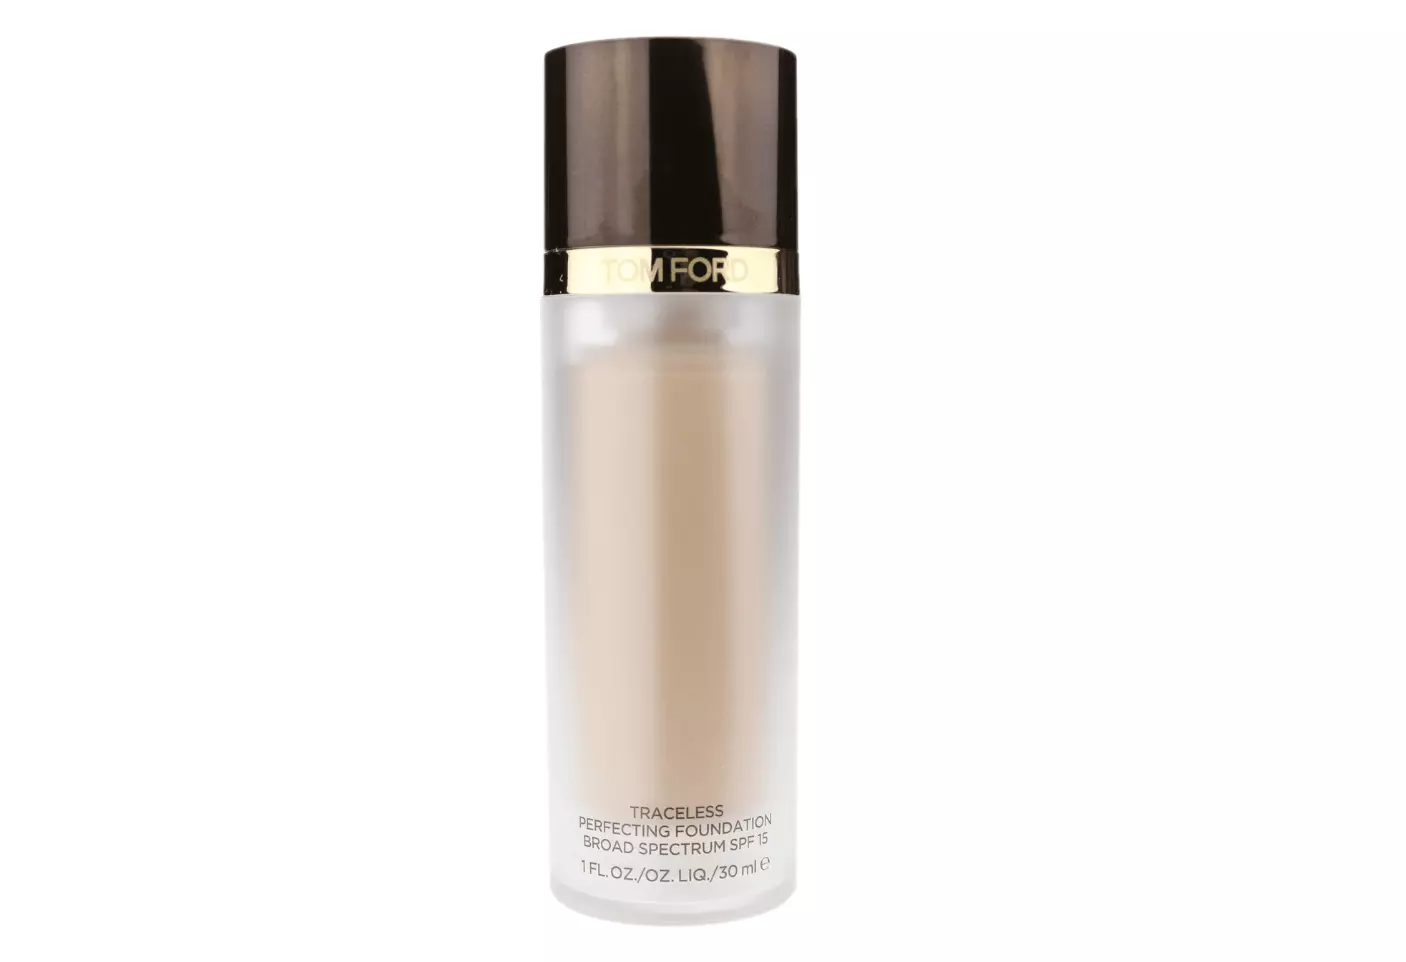 Tom Ford Traceless Perfecting Foundation SPF15 Vellum   -  Best deals on Tom Ford cosmetics